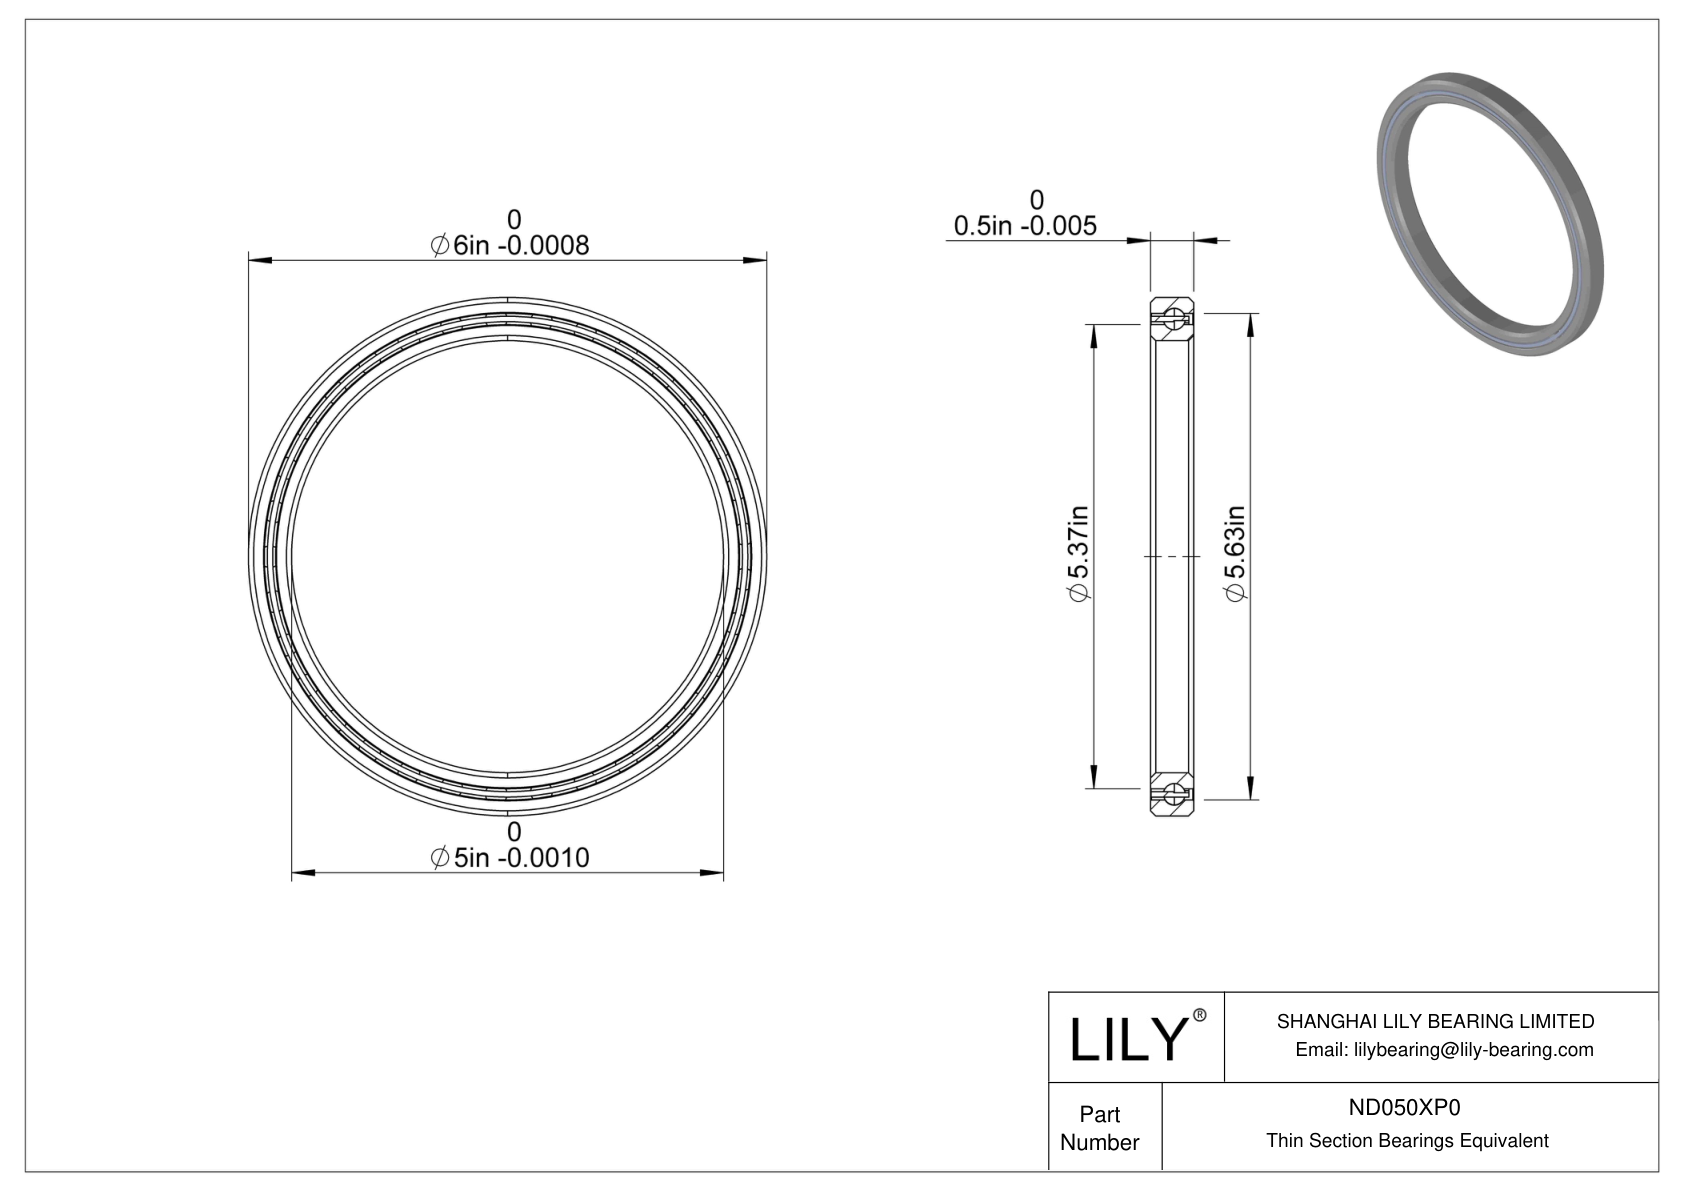 ND050XP0 Constant Section (CS) Bearings cad drawing